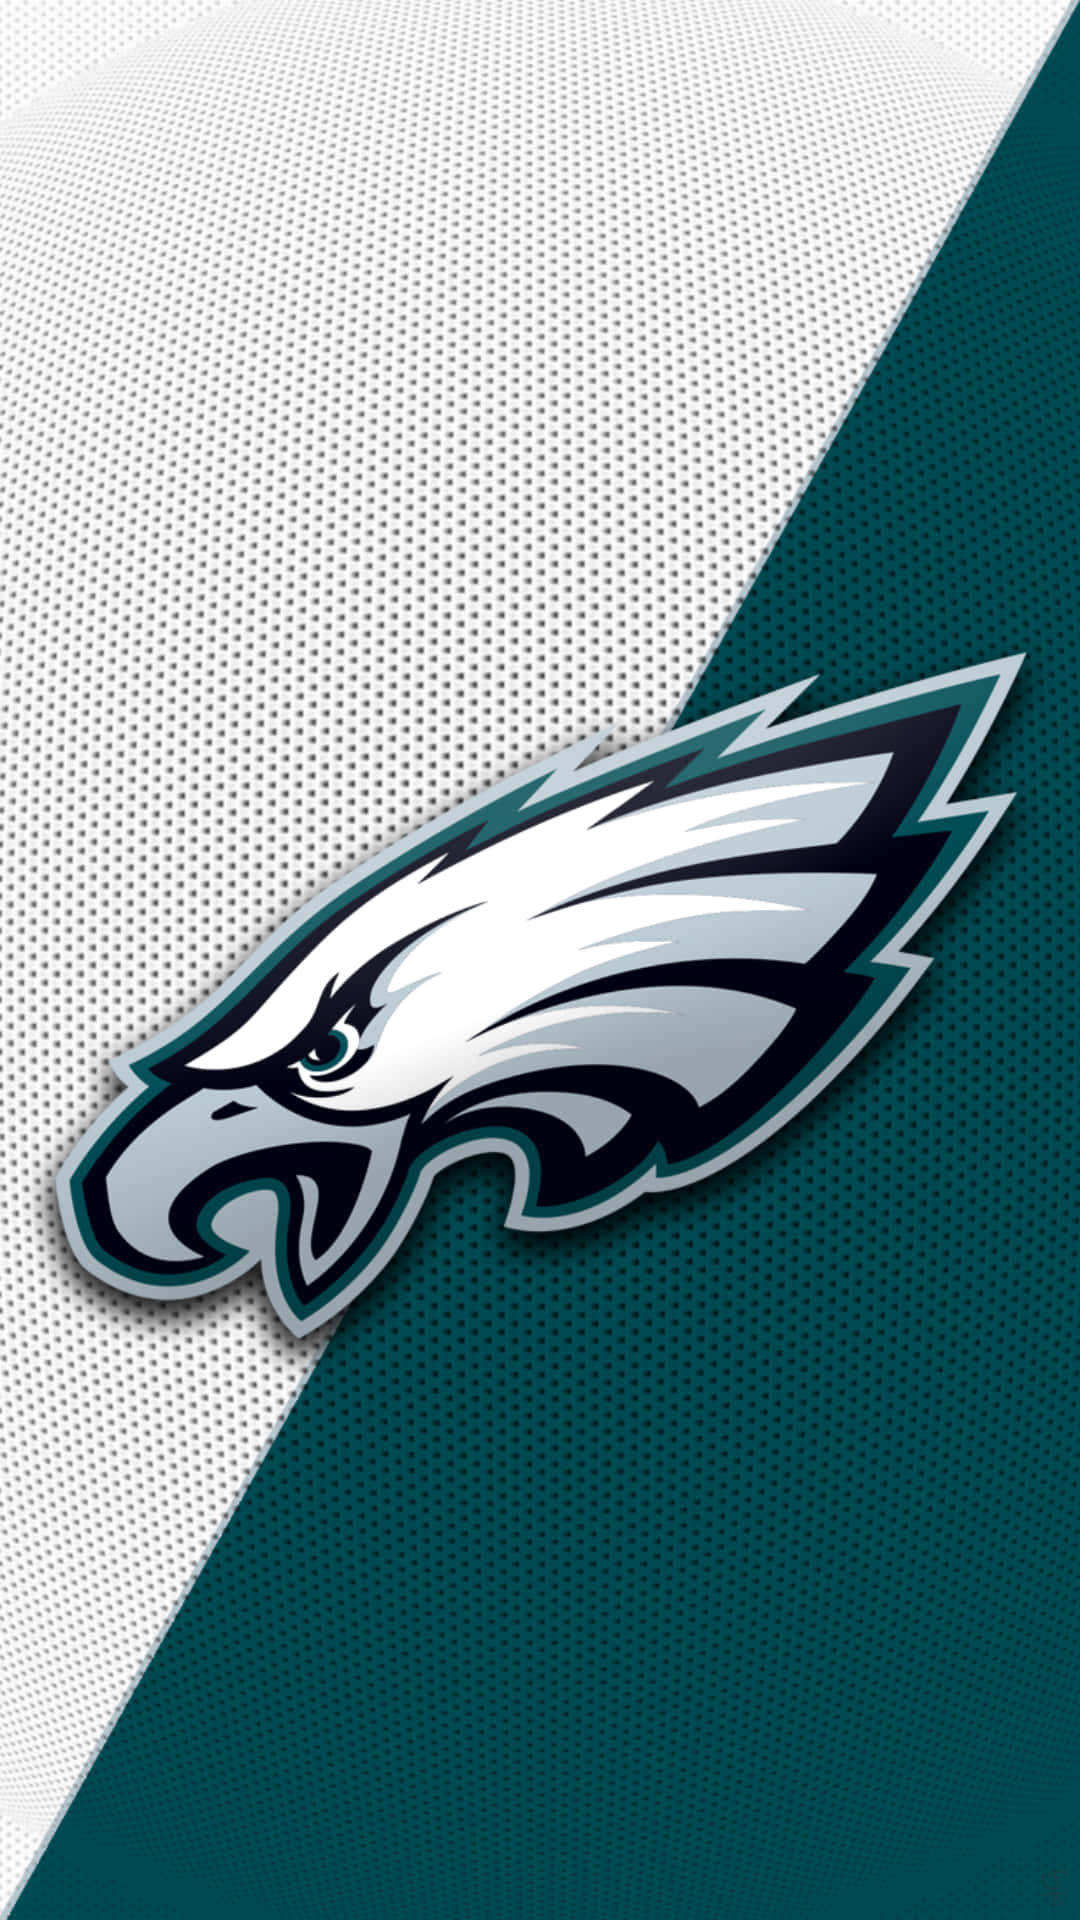 Show off your Philadelphia Eagles fandom with this bold Iphone wallpaper! Wallpaper